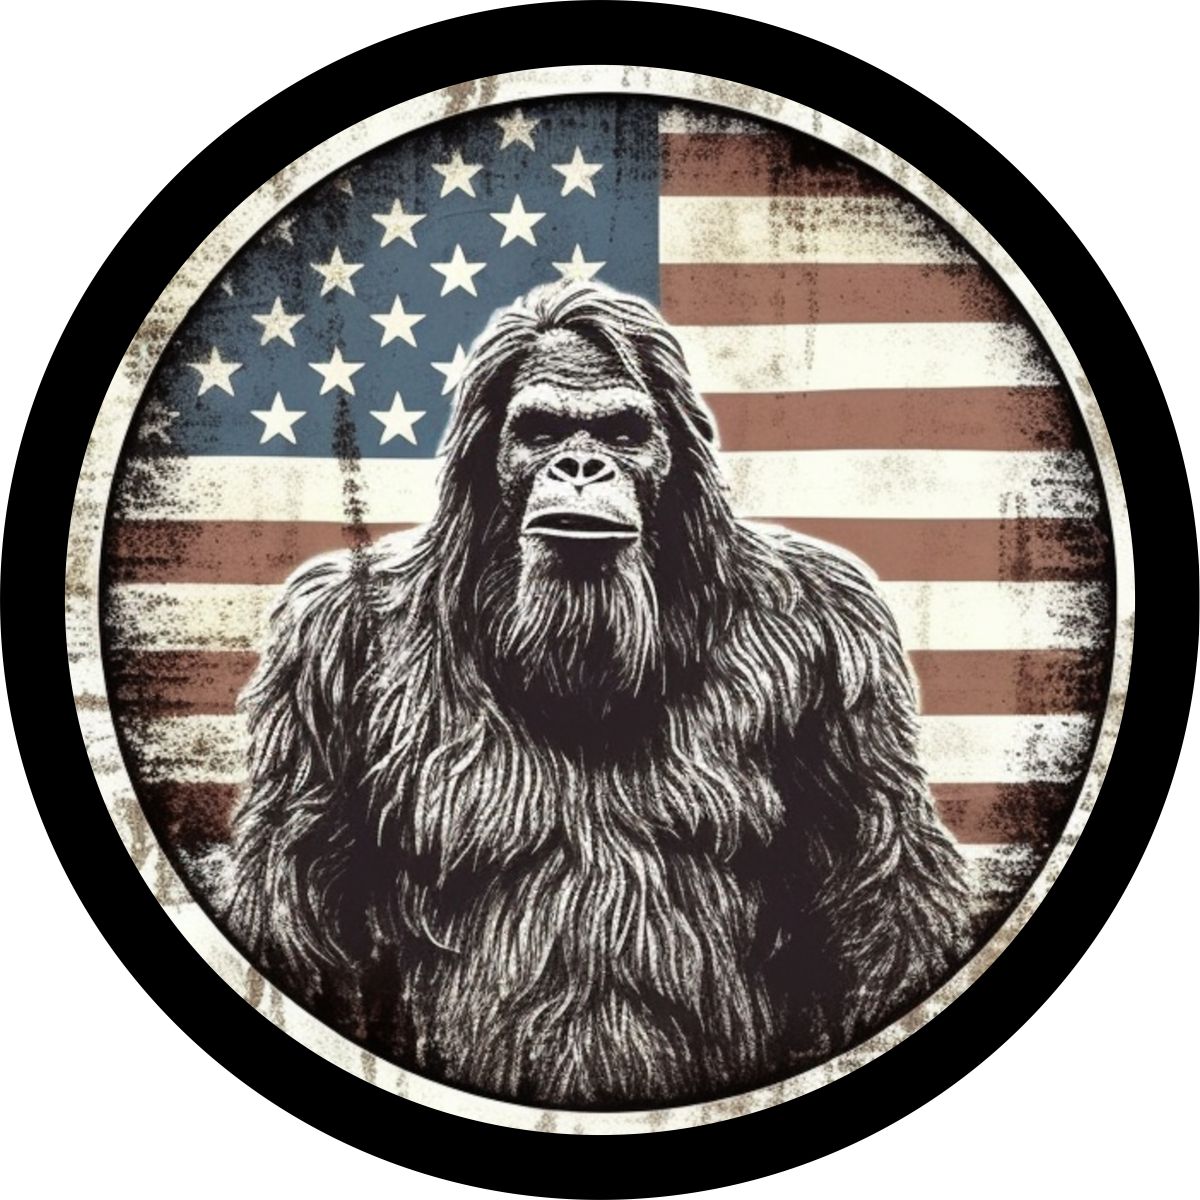 Turn of the 20th century style graphic design of a Sasquatch spare tire cover with an American Flag background.